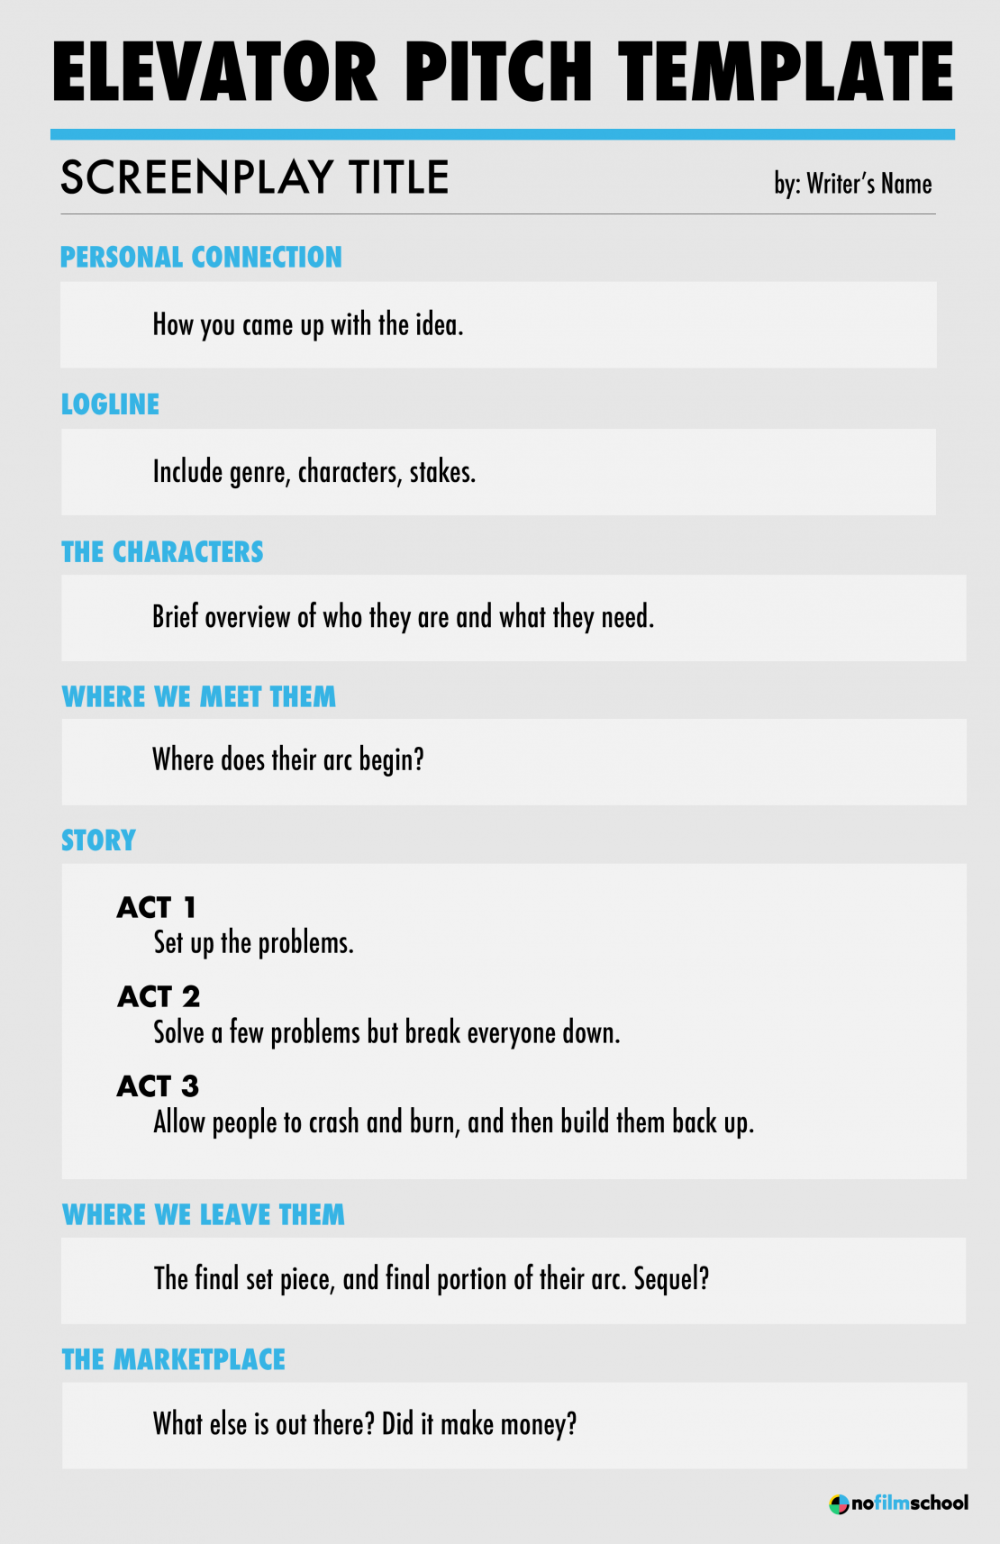 How To Write An Elevator Pitch Free Elevator Pitch Template Business Inspiration Quotes Business Checklist Business Basics